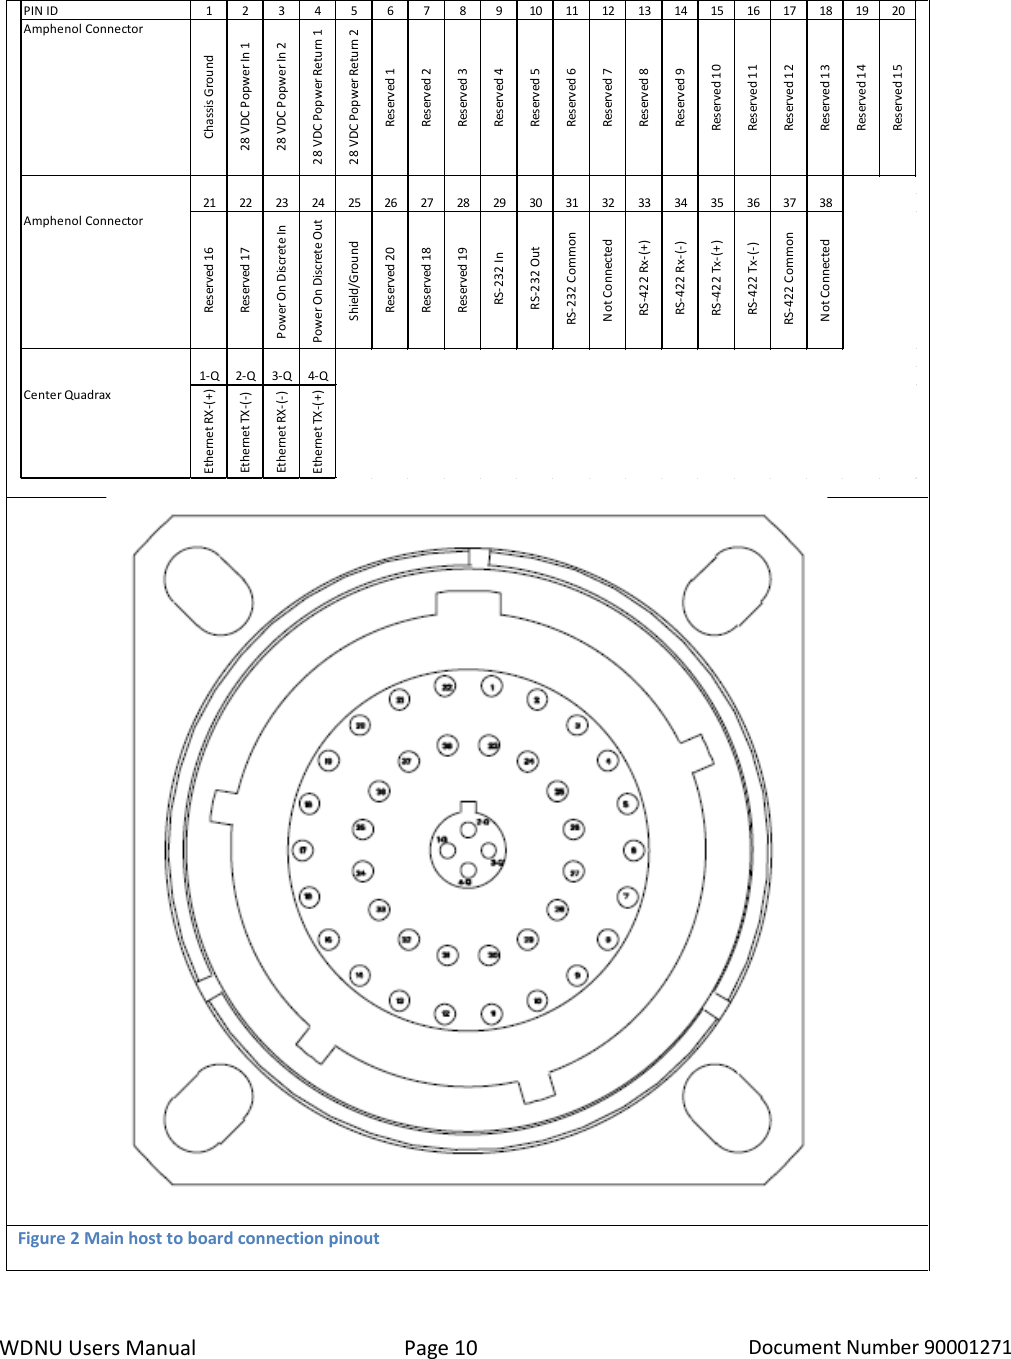 WDNU Users Manual Page 10 Document Number 90001271    Figure 2 Main host to board connection pinout  PIN ID 12345678910 11 12 13 14 15 16 17 18 19 20Amphenol ConnectorChassis Ground28 VDC Popwer In 128 VDC Popwer In 228 VDC Popwer Return 128 VDC Popwer Return 2Reserved 1Reserved 2Reserved 3Reserved 4Reserved 5Reserved 6Reserved 7Reserved 8Reserved 9Reserved 10Reserved 11Reserved 12Reserved 13Reserved 14Reserved 1521 22 23 24 25 26 27 28 29 30 31 32 33 34 35 36 37 38Amphenol ConnectorReserved 16Reserved 17Power On Discrete InPower On Discrete OutShield/GroundReserved 20Reserved 18Reserved 19RS-232 In RS-232 OutRS-232 CommonNot ConnectedRS-422 Rx-(+)RS-422 Rx-(-)RS-422 Tx-(+)RS-422 Tx-(-)RS-422 CommonNot Connected1-Q 2-Q 3-Q 4-QCenter QuadraxEthernet RX-(+)Ethernet TX-(-)Ethernet RX-(-)Ethernet TX-(+)